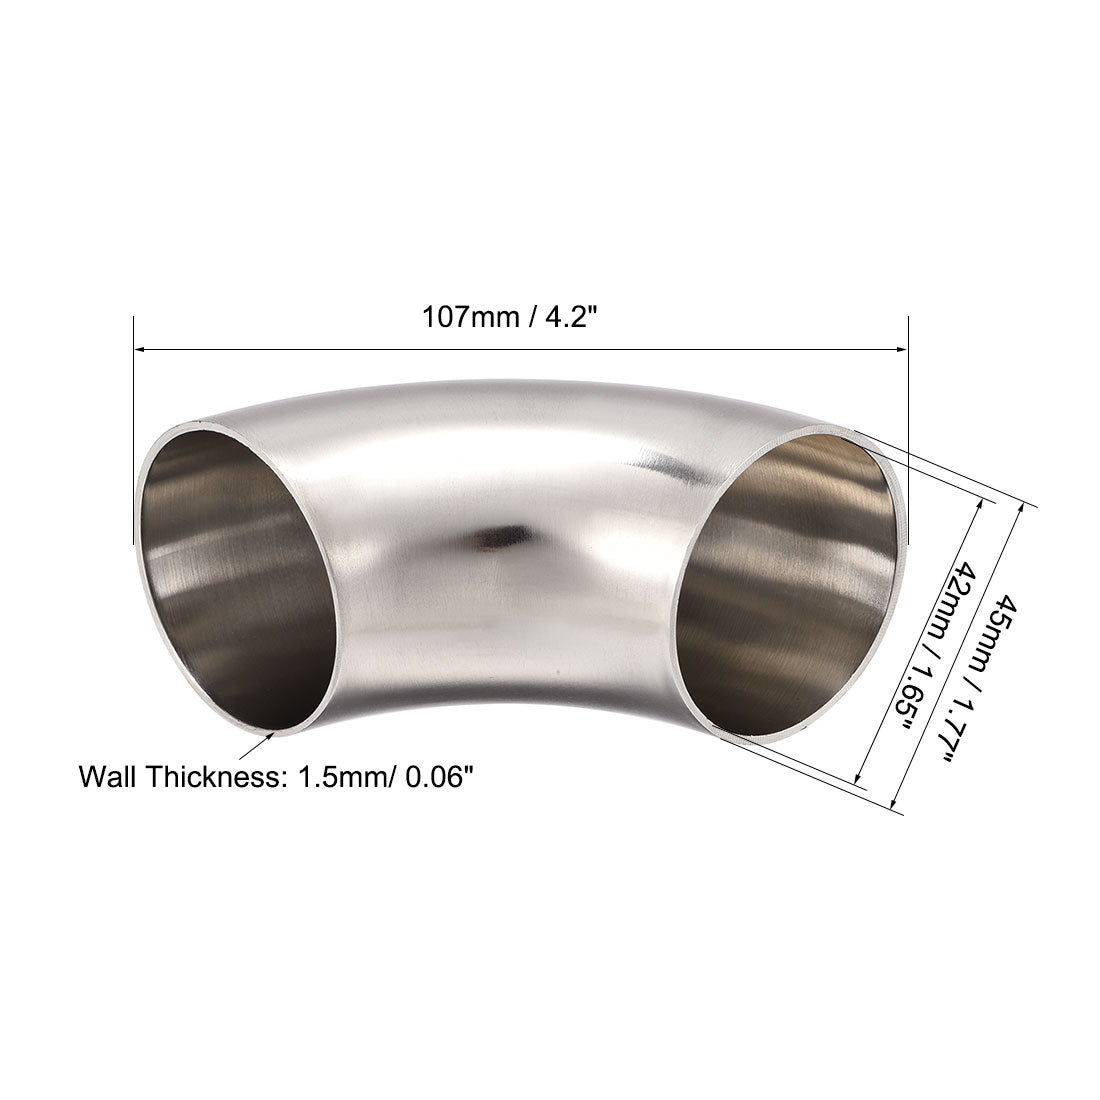 uxcell Uxcell Stainless Steel 304 Vacuum Fitting Elbow 90 Degree Polished 1.77 Inch Tube OD